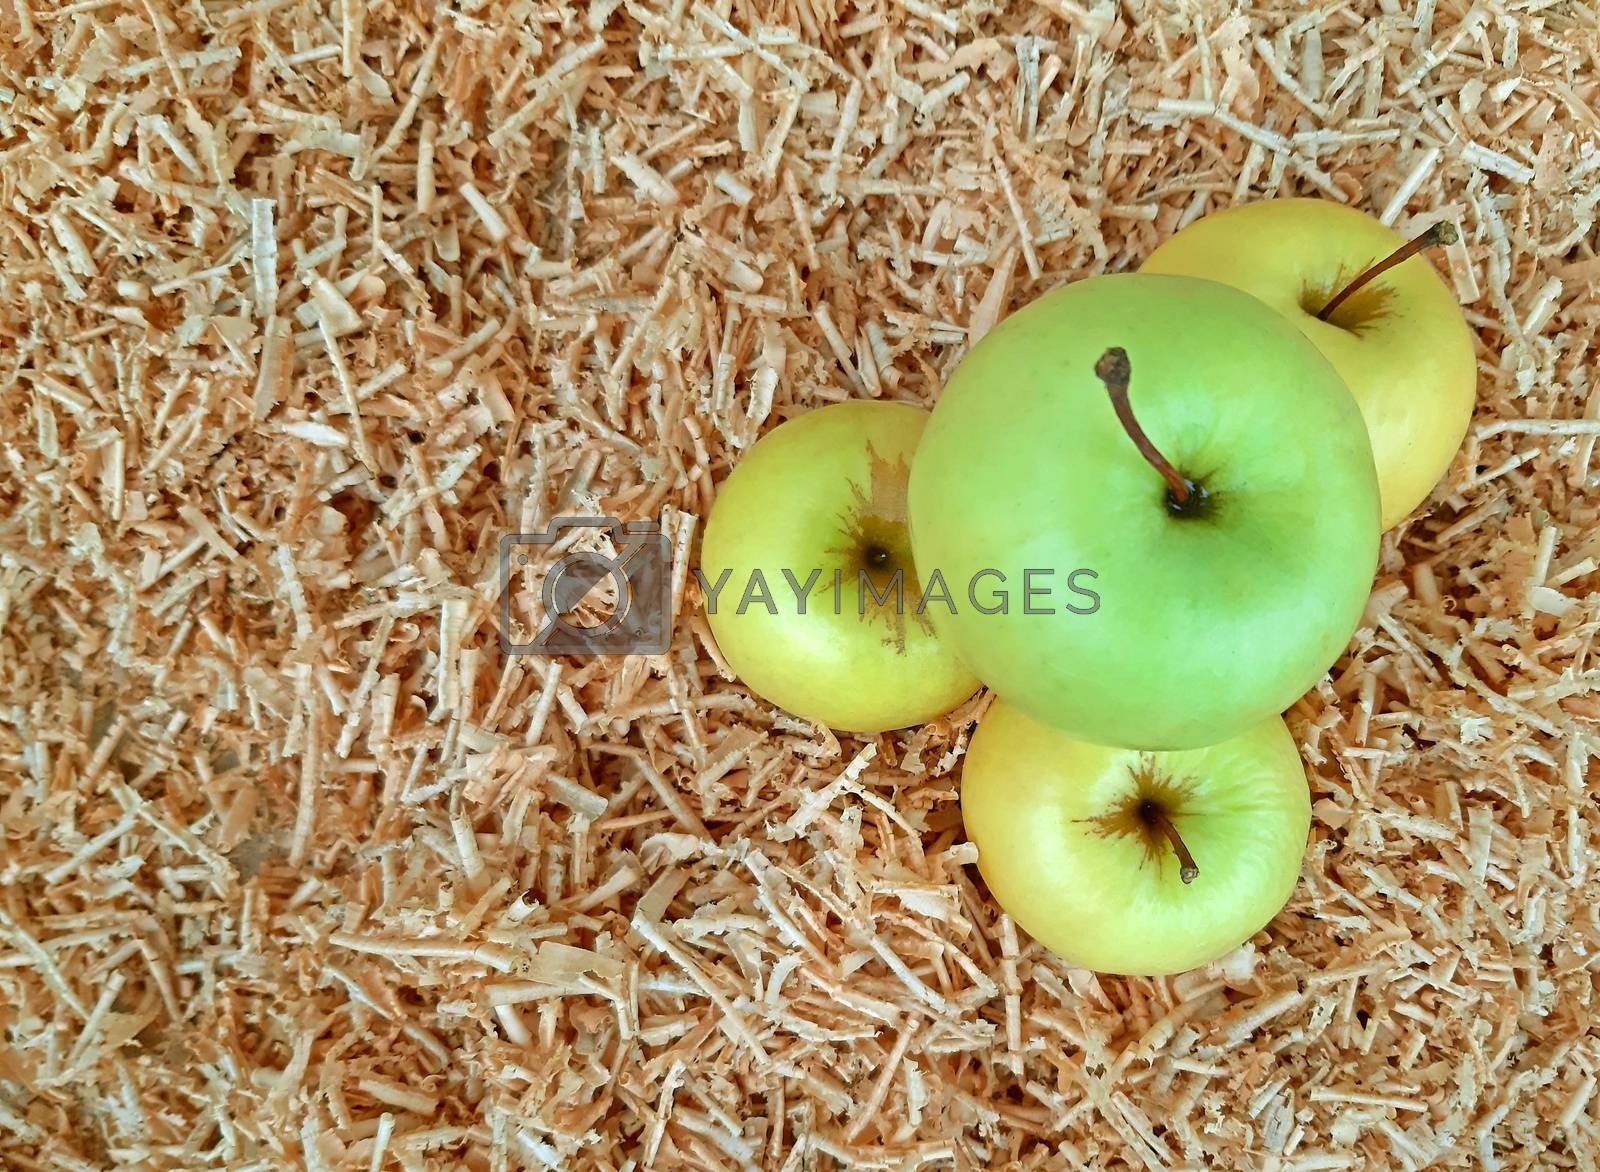 Royalty free image of White apples on the background of sawdust by Mindru